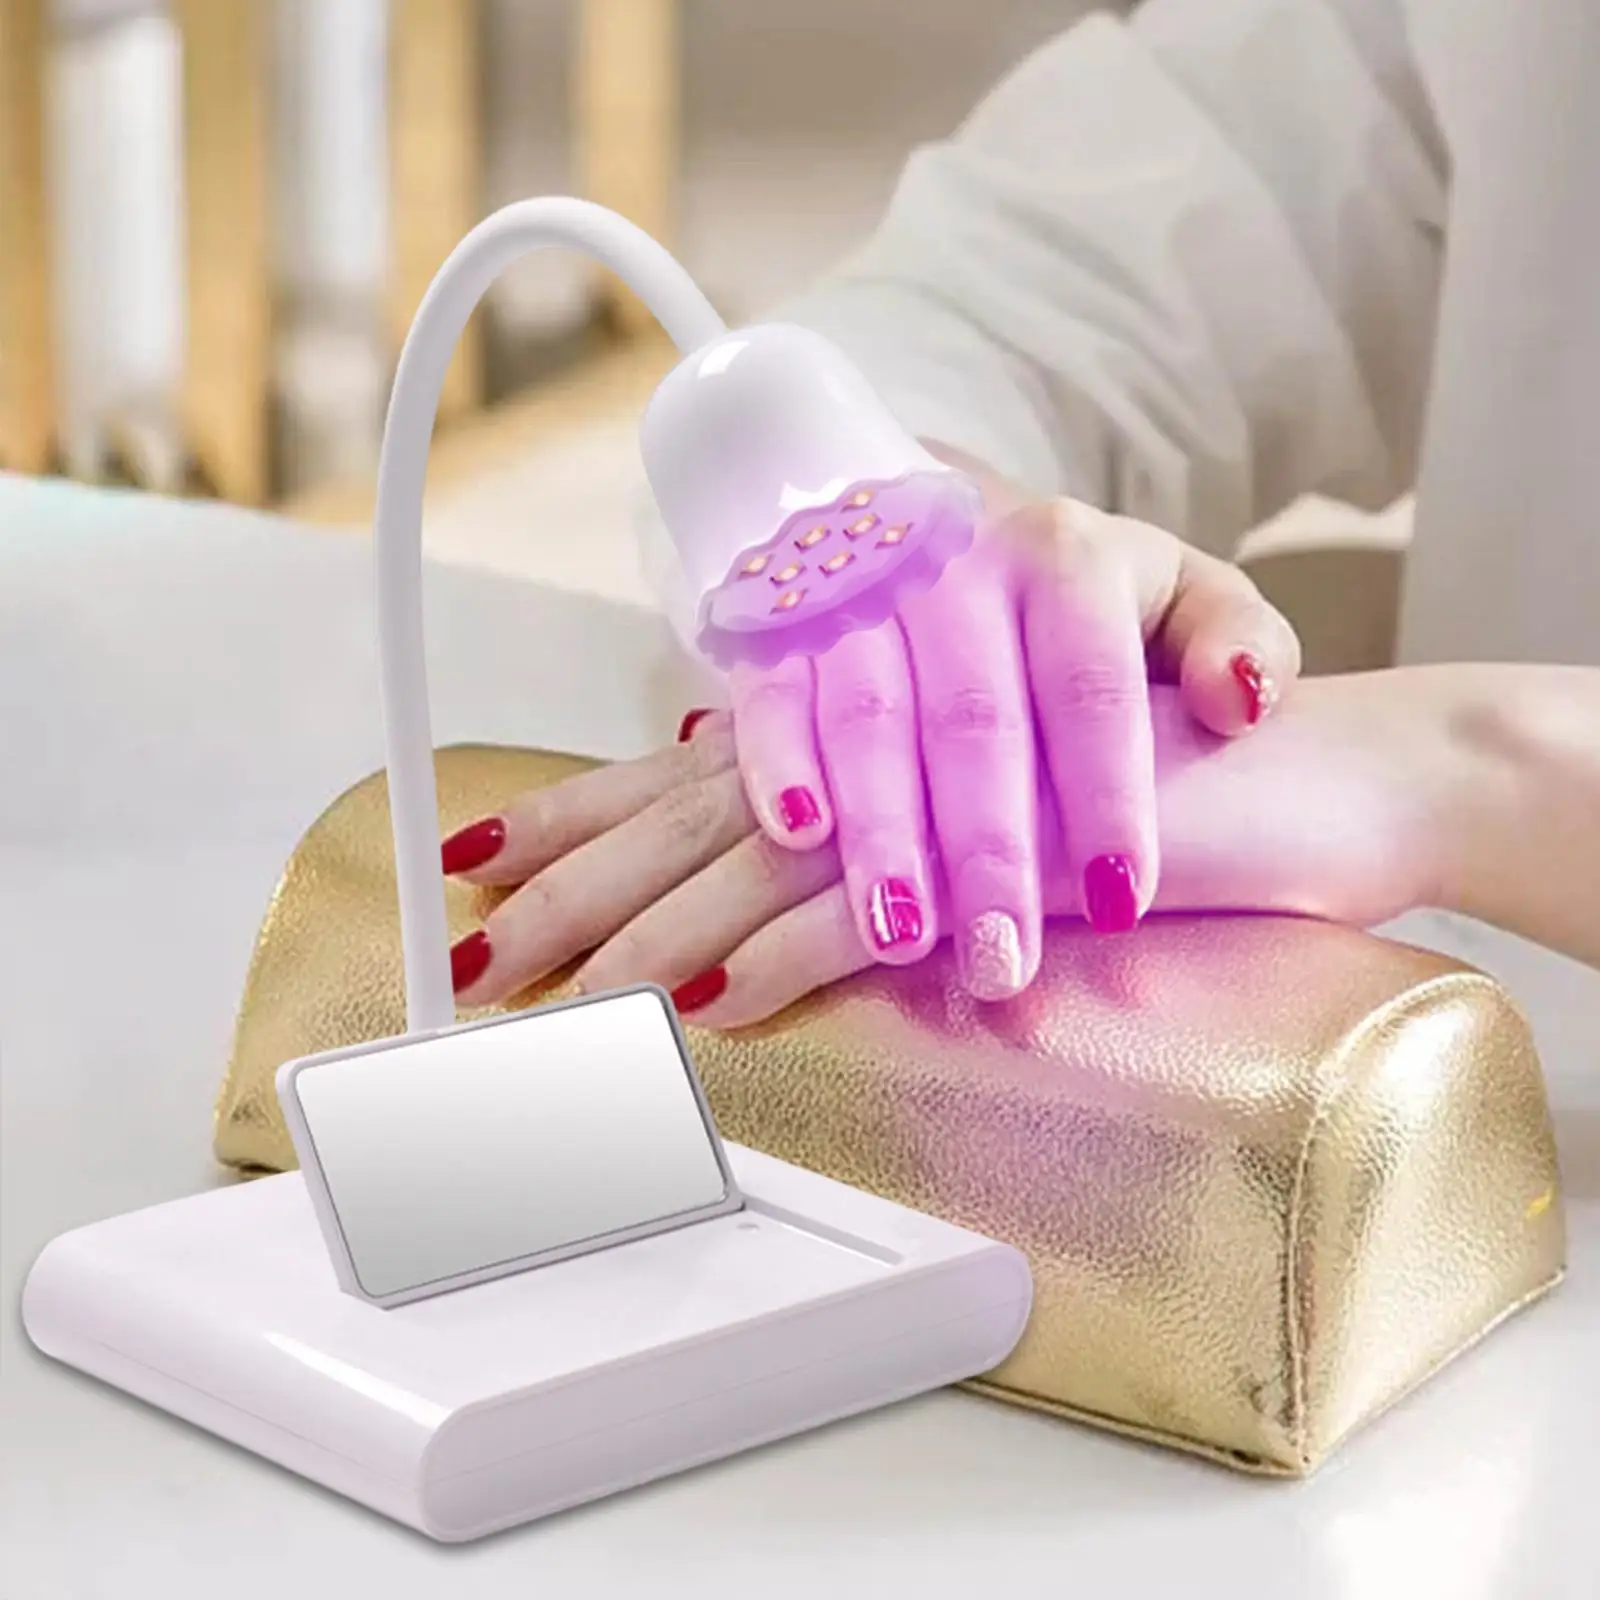 LED Nail Lamp Rechargeable with 8Pcs LED Professional Flexible Nail Art Tools Portable 20W Nail Dryer Machine for Toenail Gel